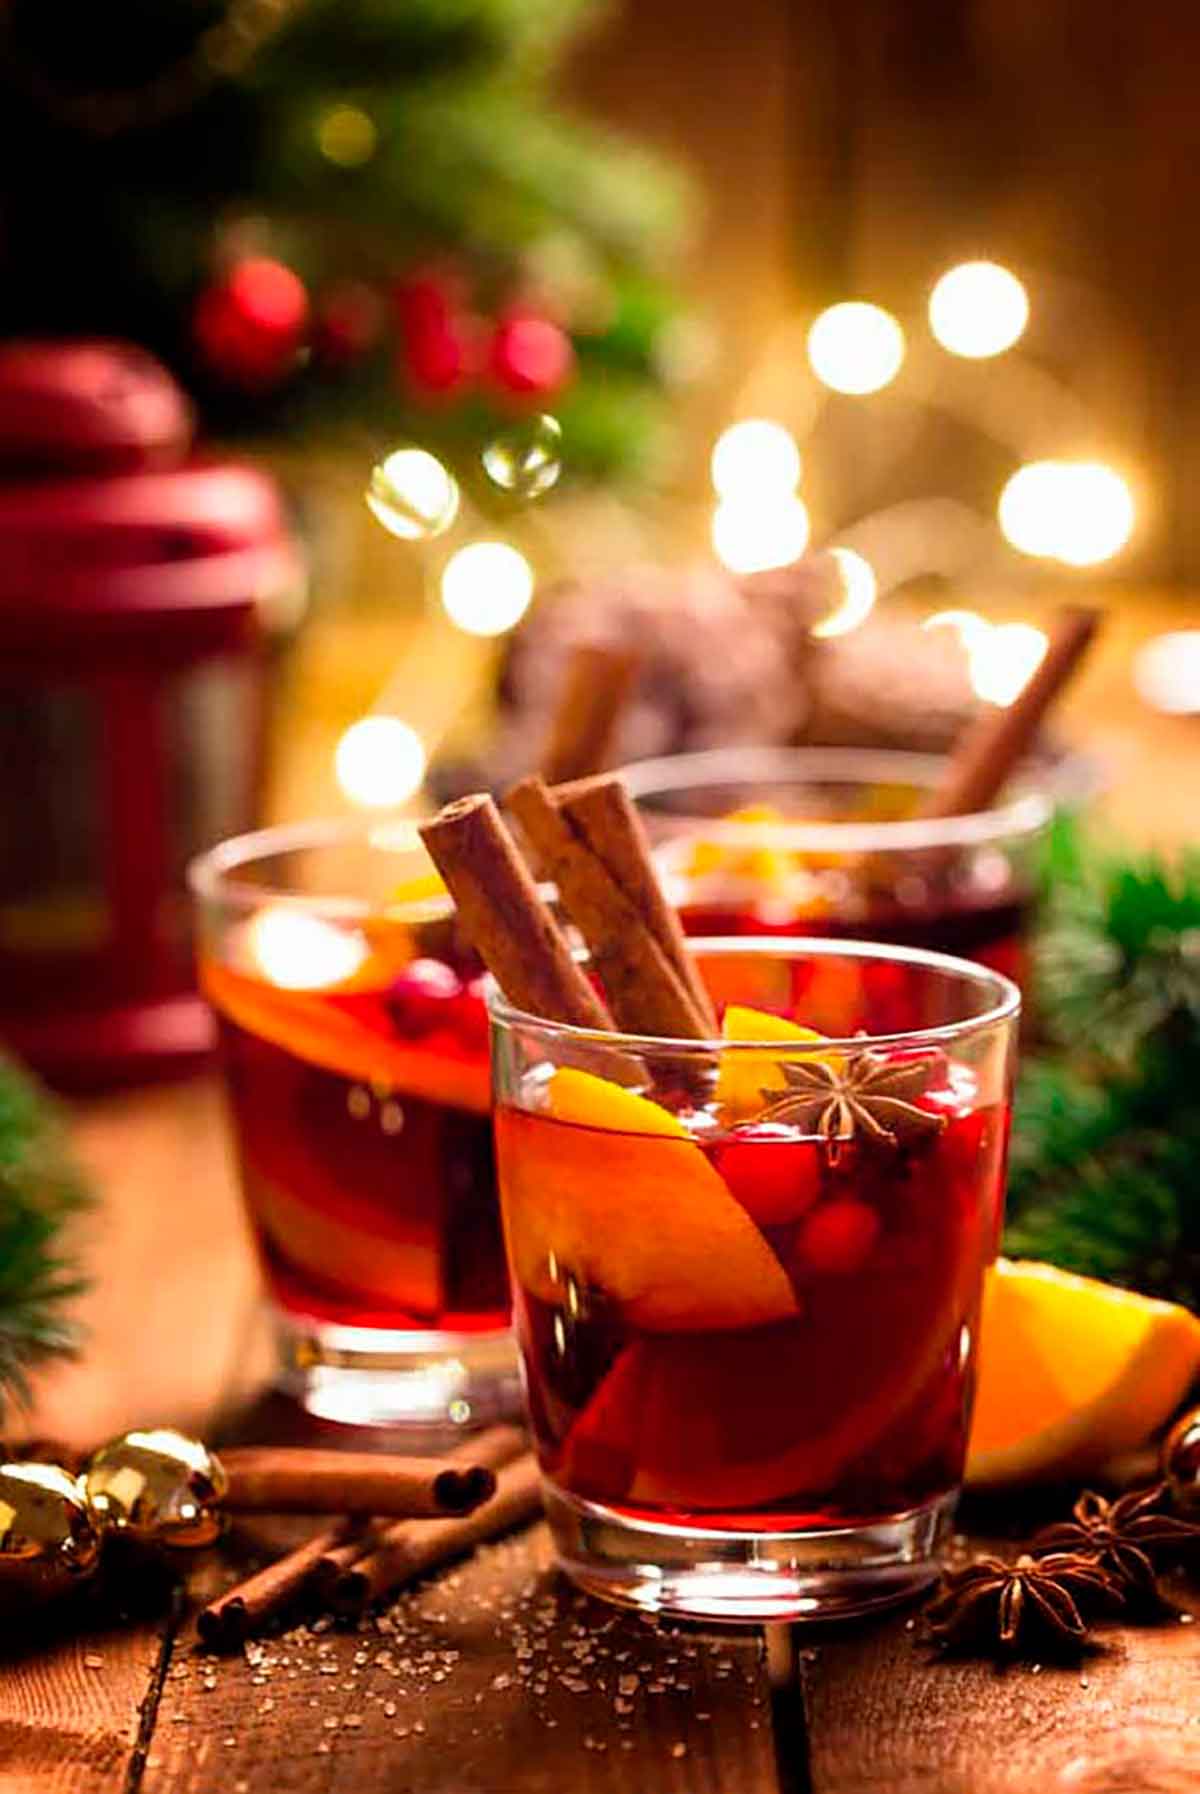 3 Gluhwein cocktails, garnished with cinnamon, orange and cranberries in a holiday setting.